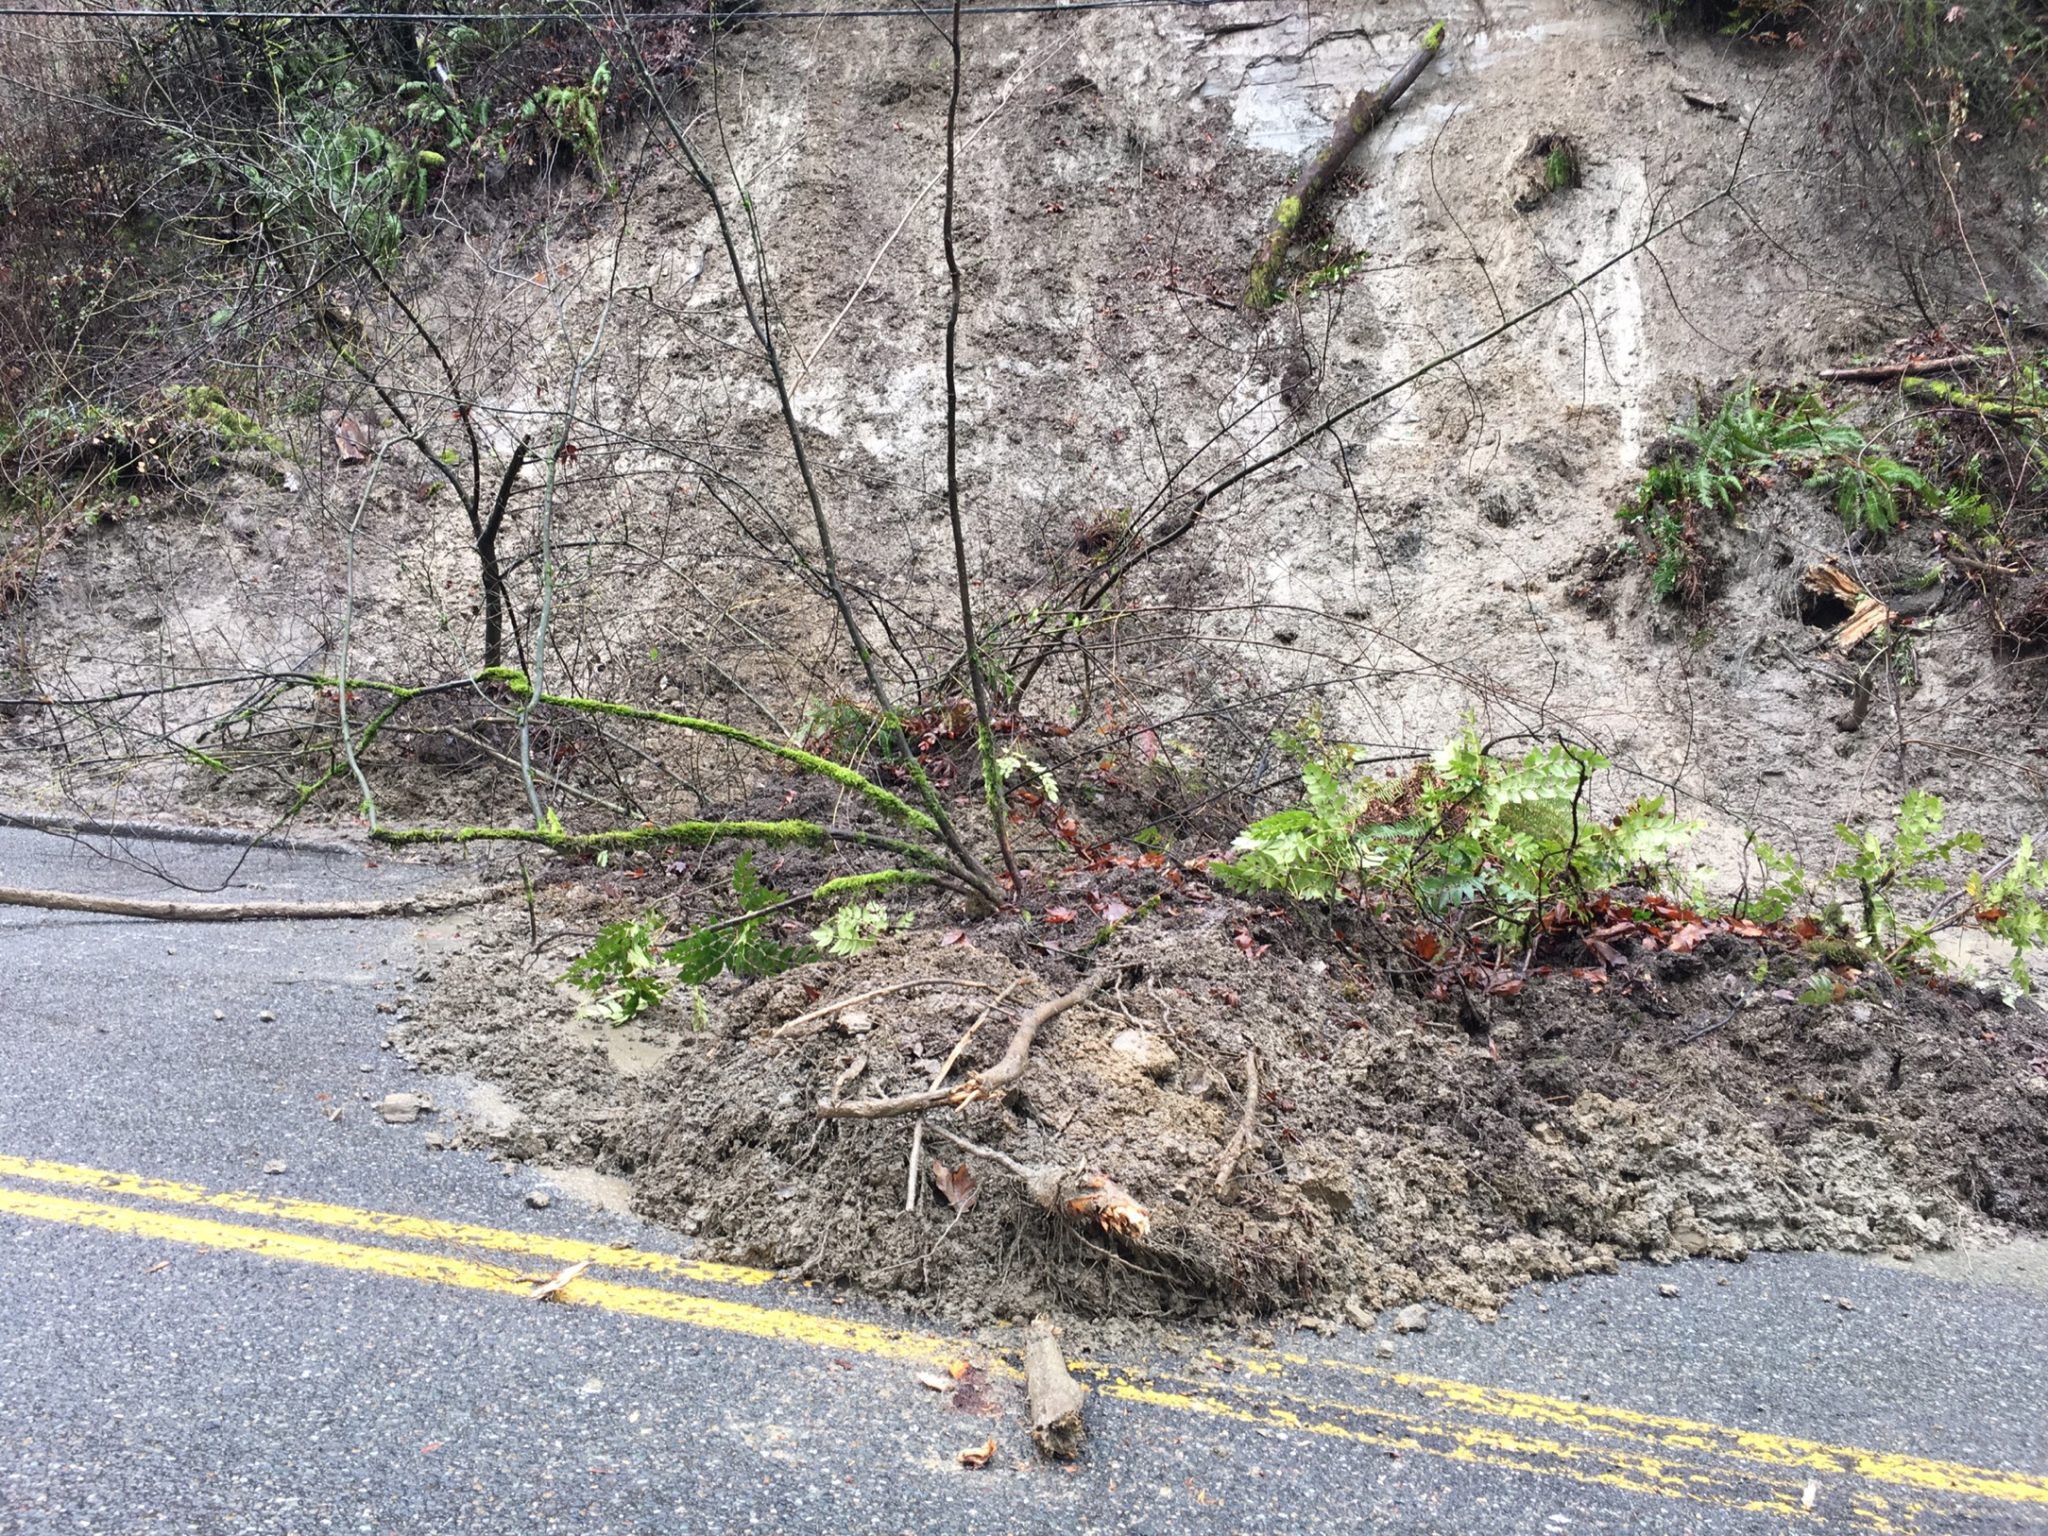 Photo of significant mud, plants, and other debris that fell onto the street on Tuesday, January 11. The street is visible in the foreground, with the mud and debris visible in the middle and background of the photo.